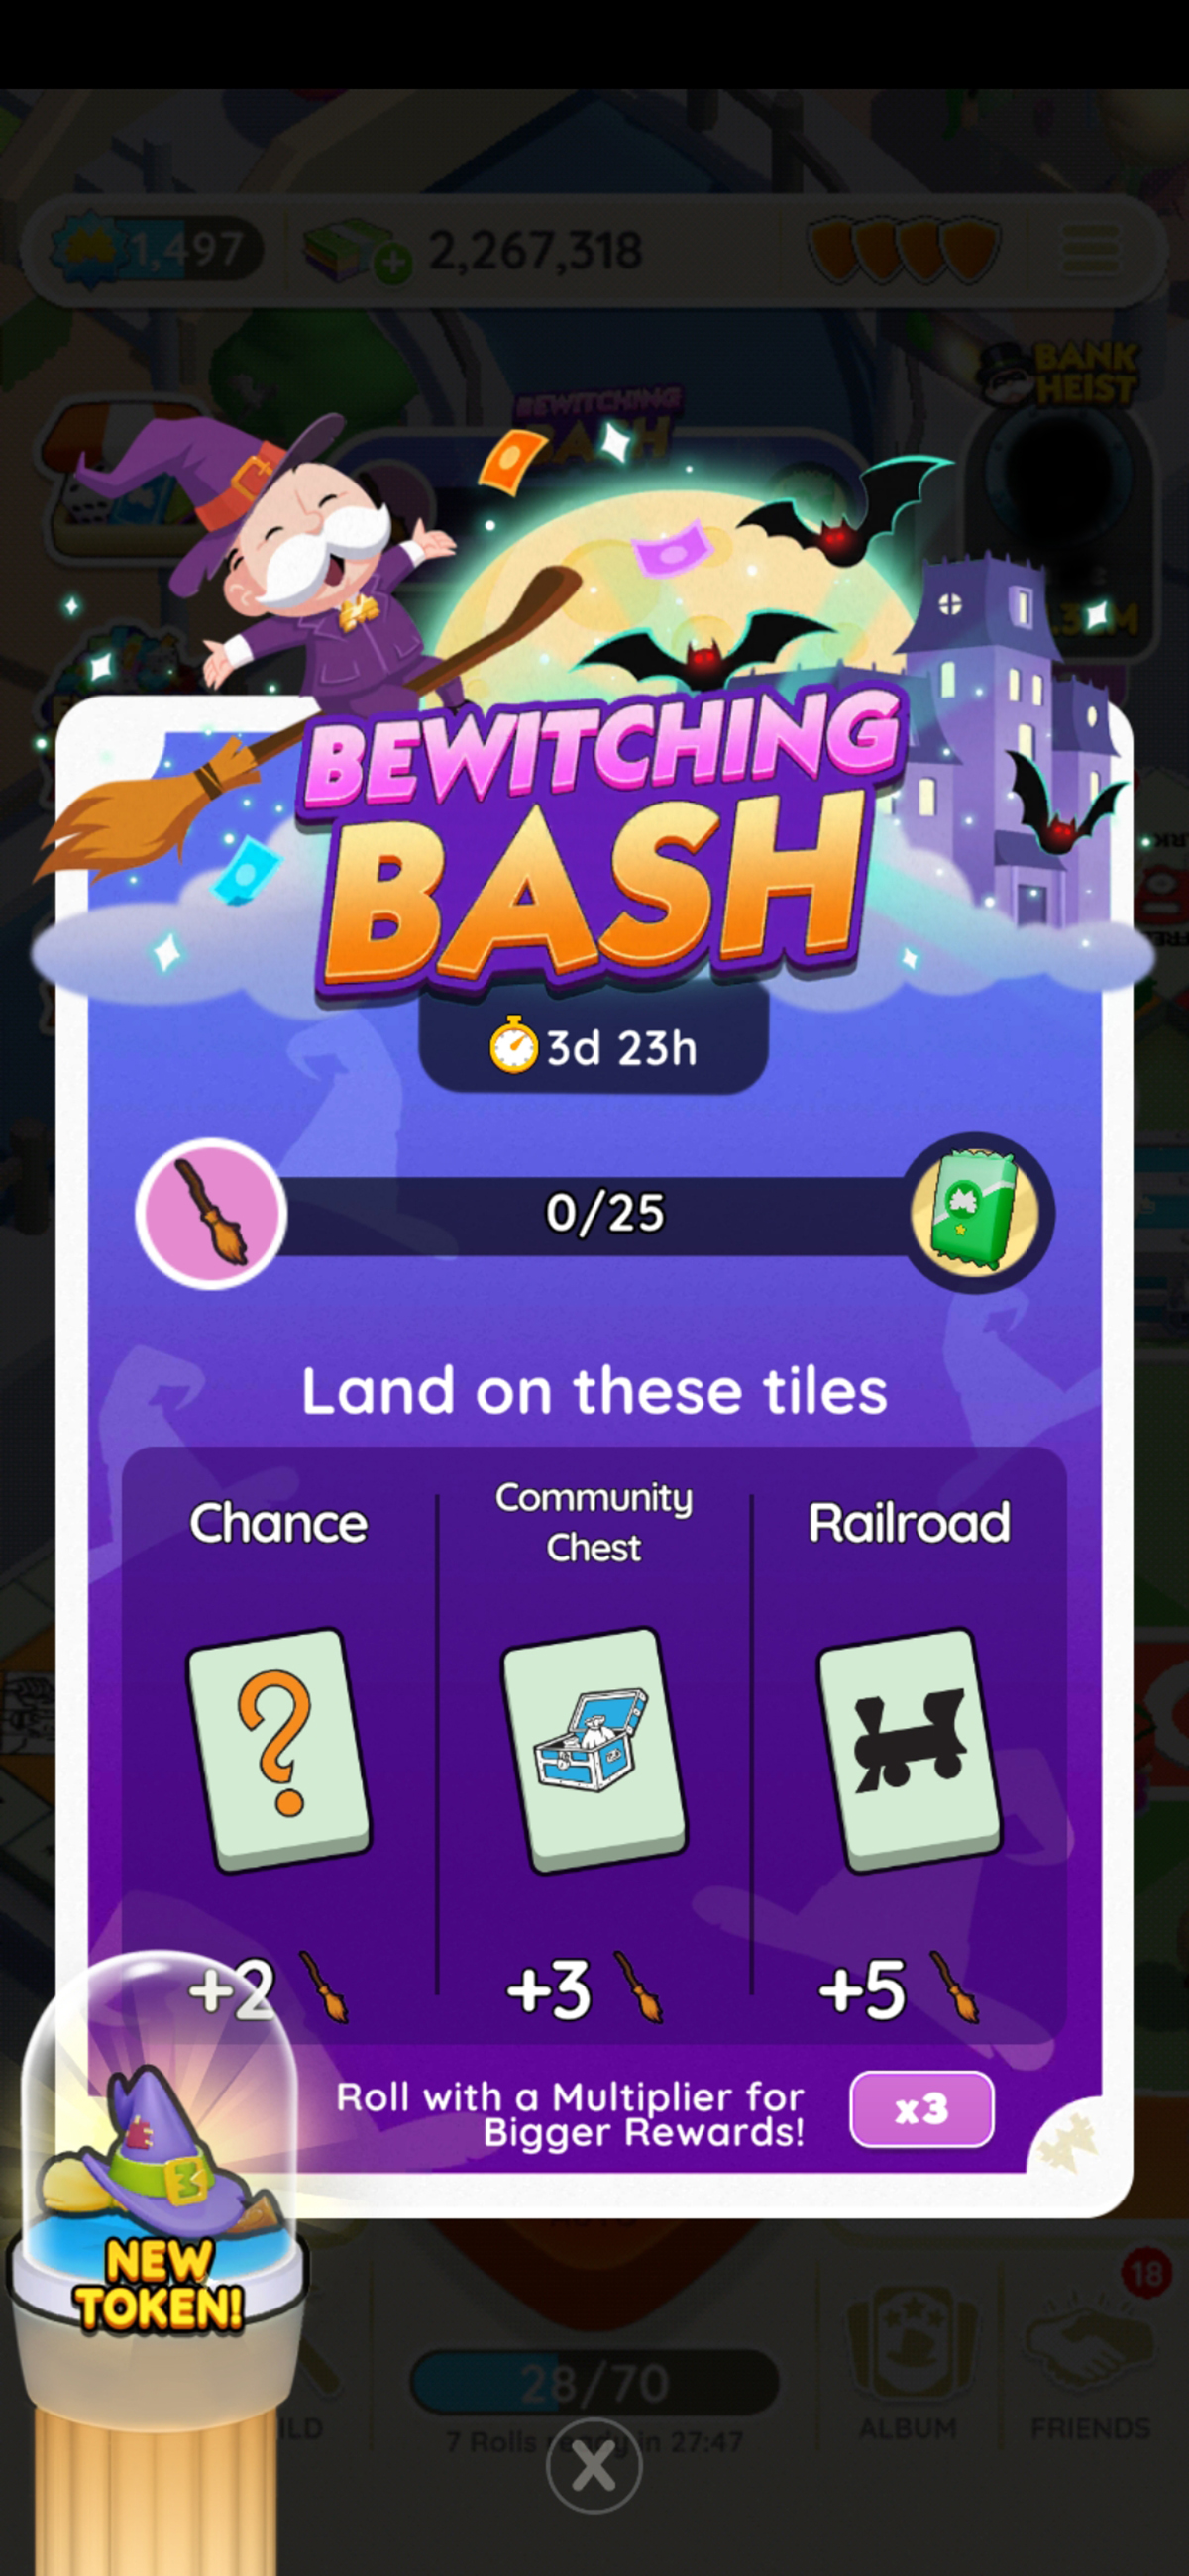 An image of the rules for the "Bewitching Bash" event in Monopoly GO. The image shows Rich Uncle Pennybags flying on a broomstick towards a moon and some bats.